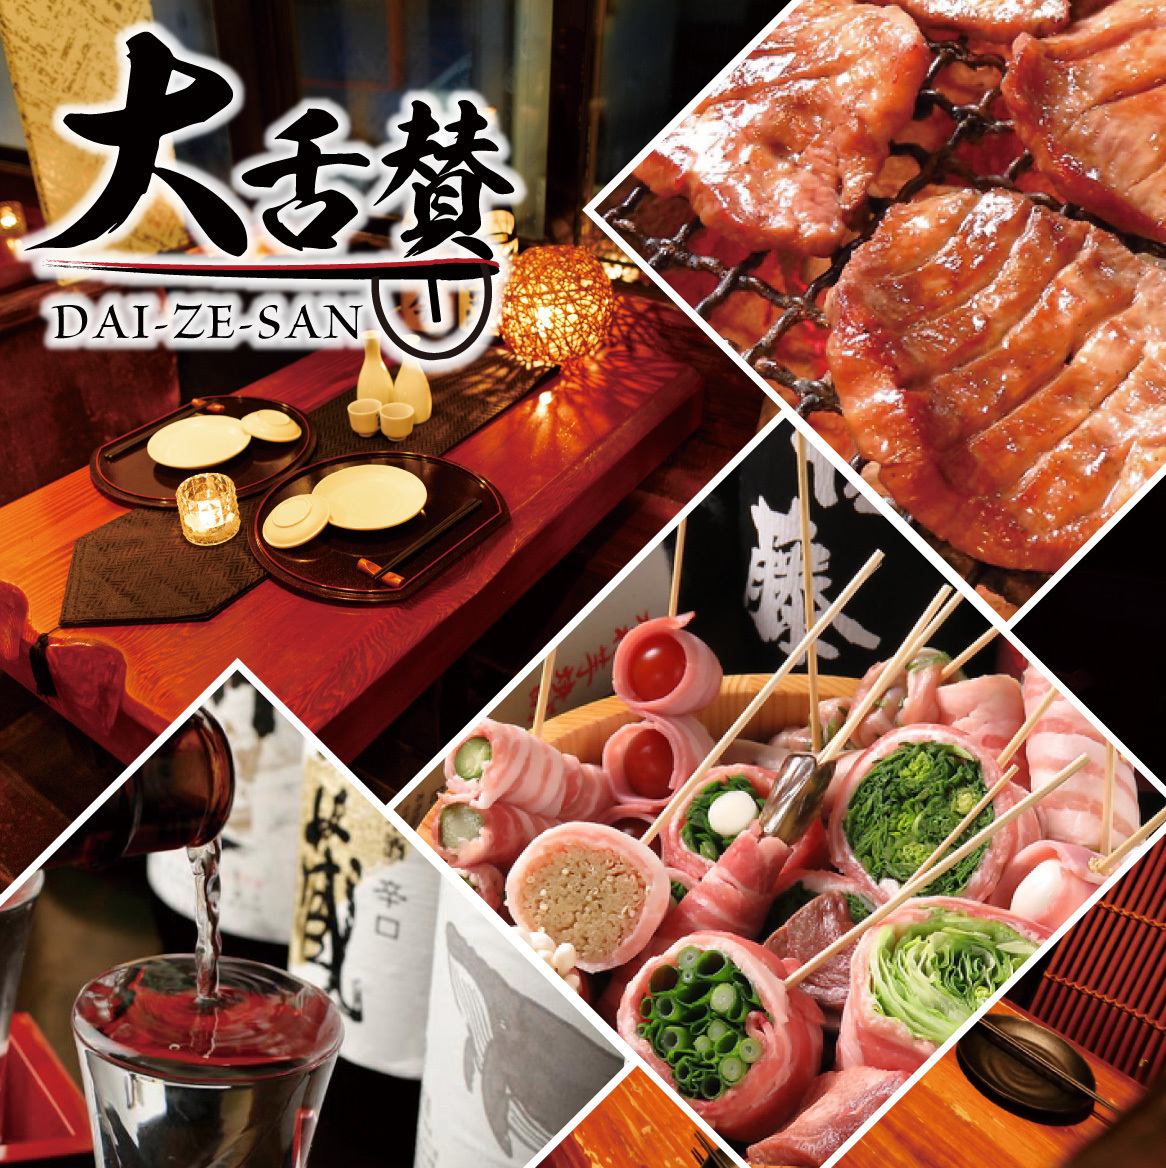 ■ All seats are private rooms Wagyu beef and sushi roll restaurant Oshitasan Shinjuku South Entrance ■Banquets and receptions/Online reservations are accepted 24 hours a day